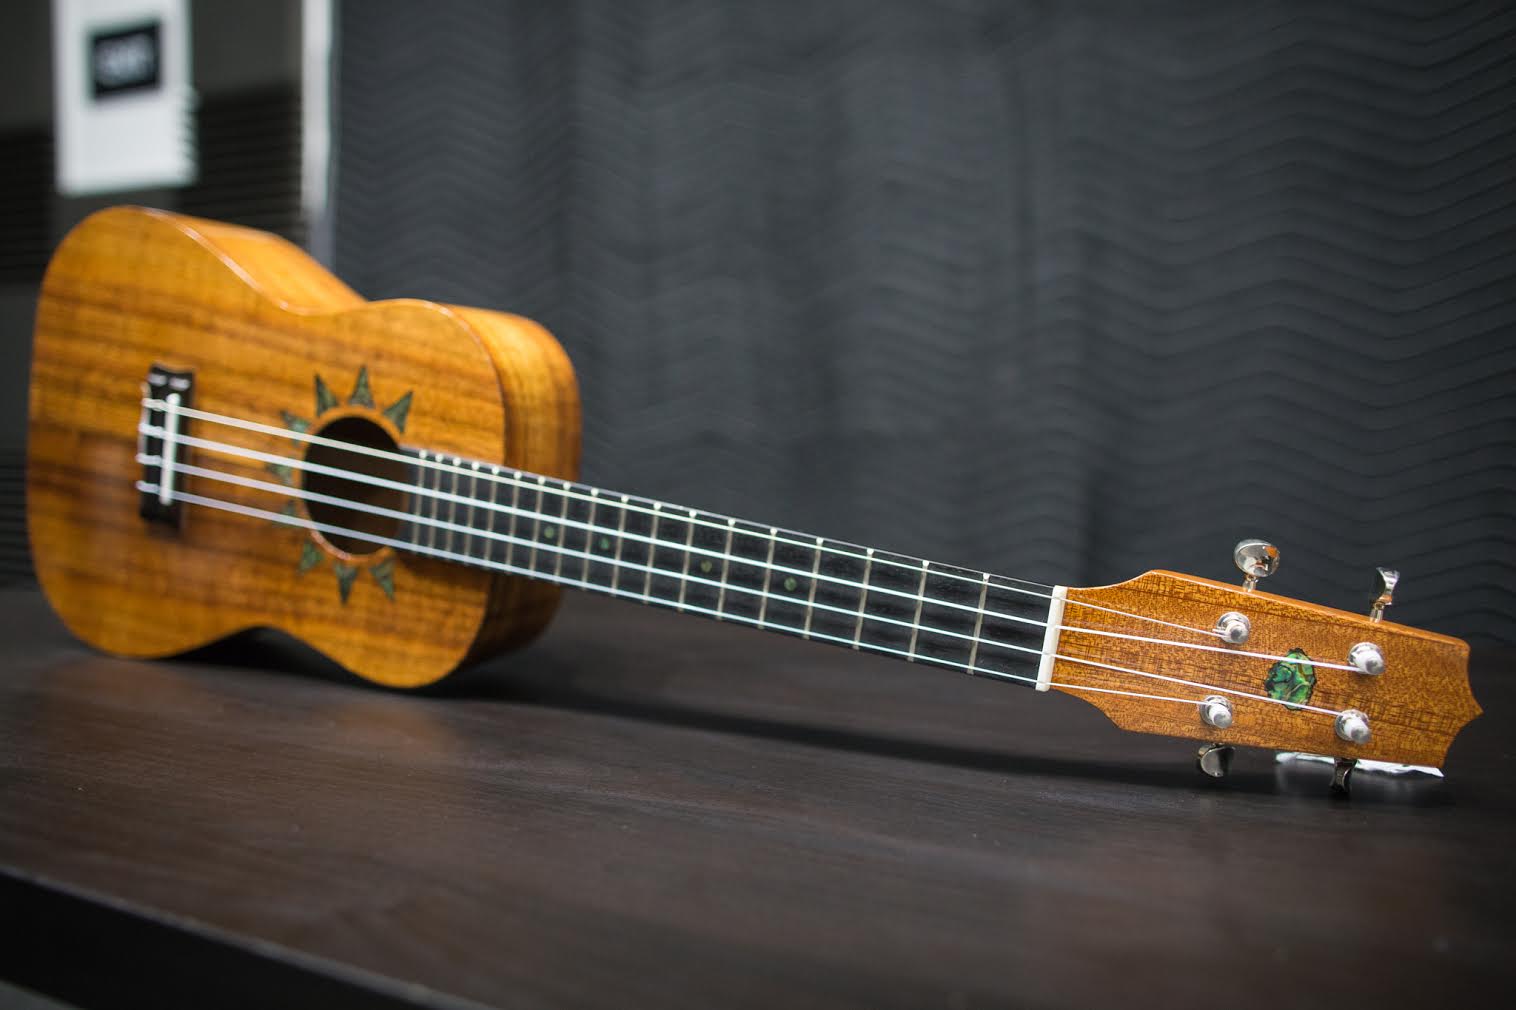  Island Ukulele For more information please call: (858) 414-4492    